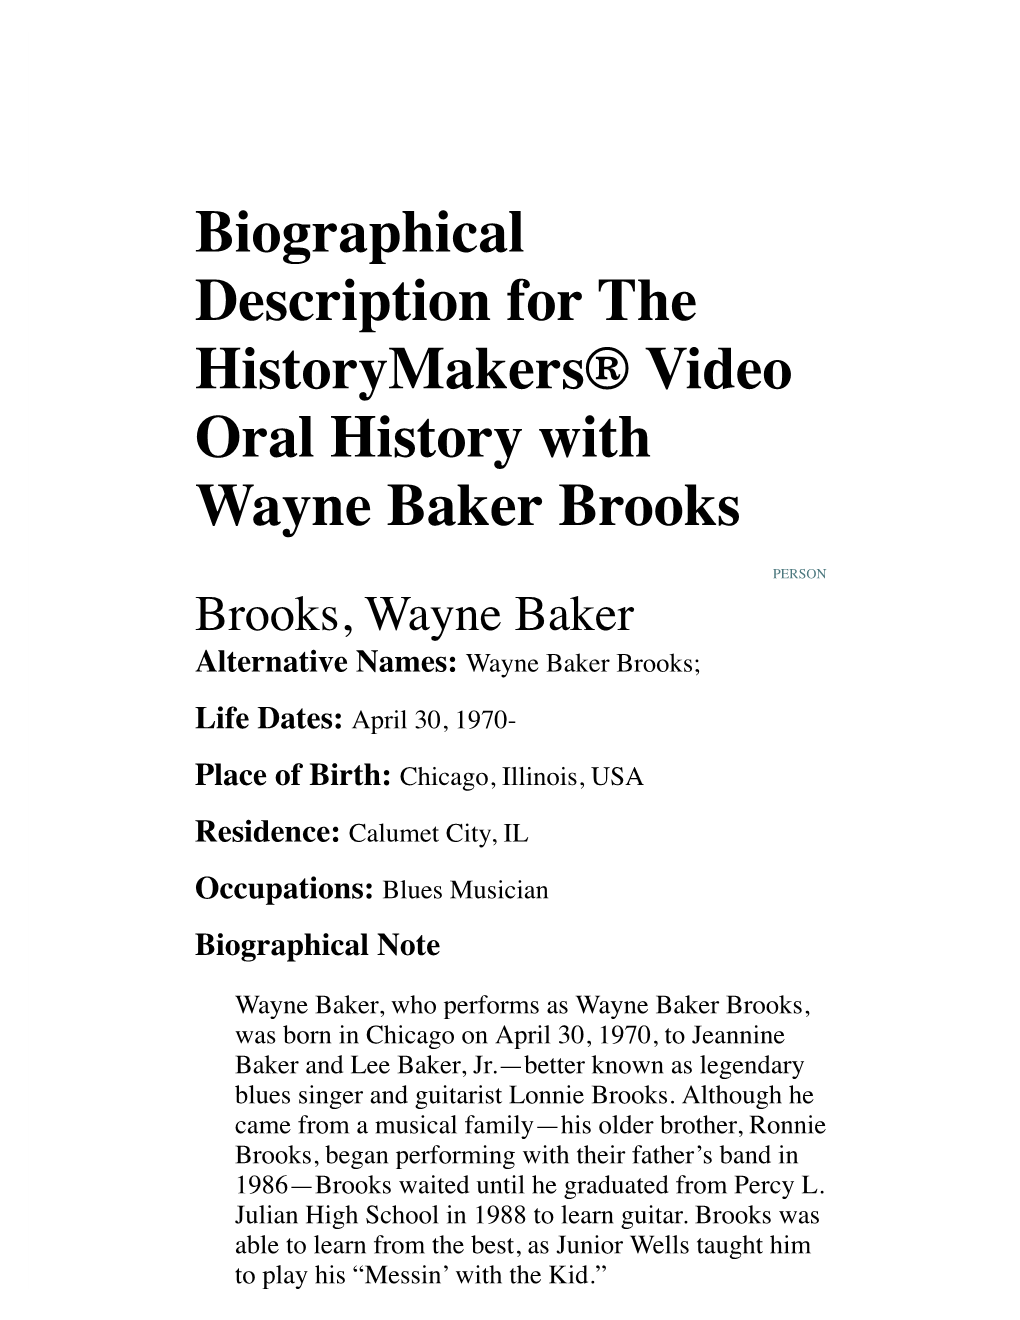 Biographical Description for the Historymakers® Video Oral History with Wayne Baker Brooks